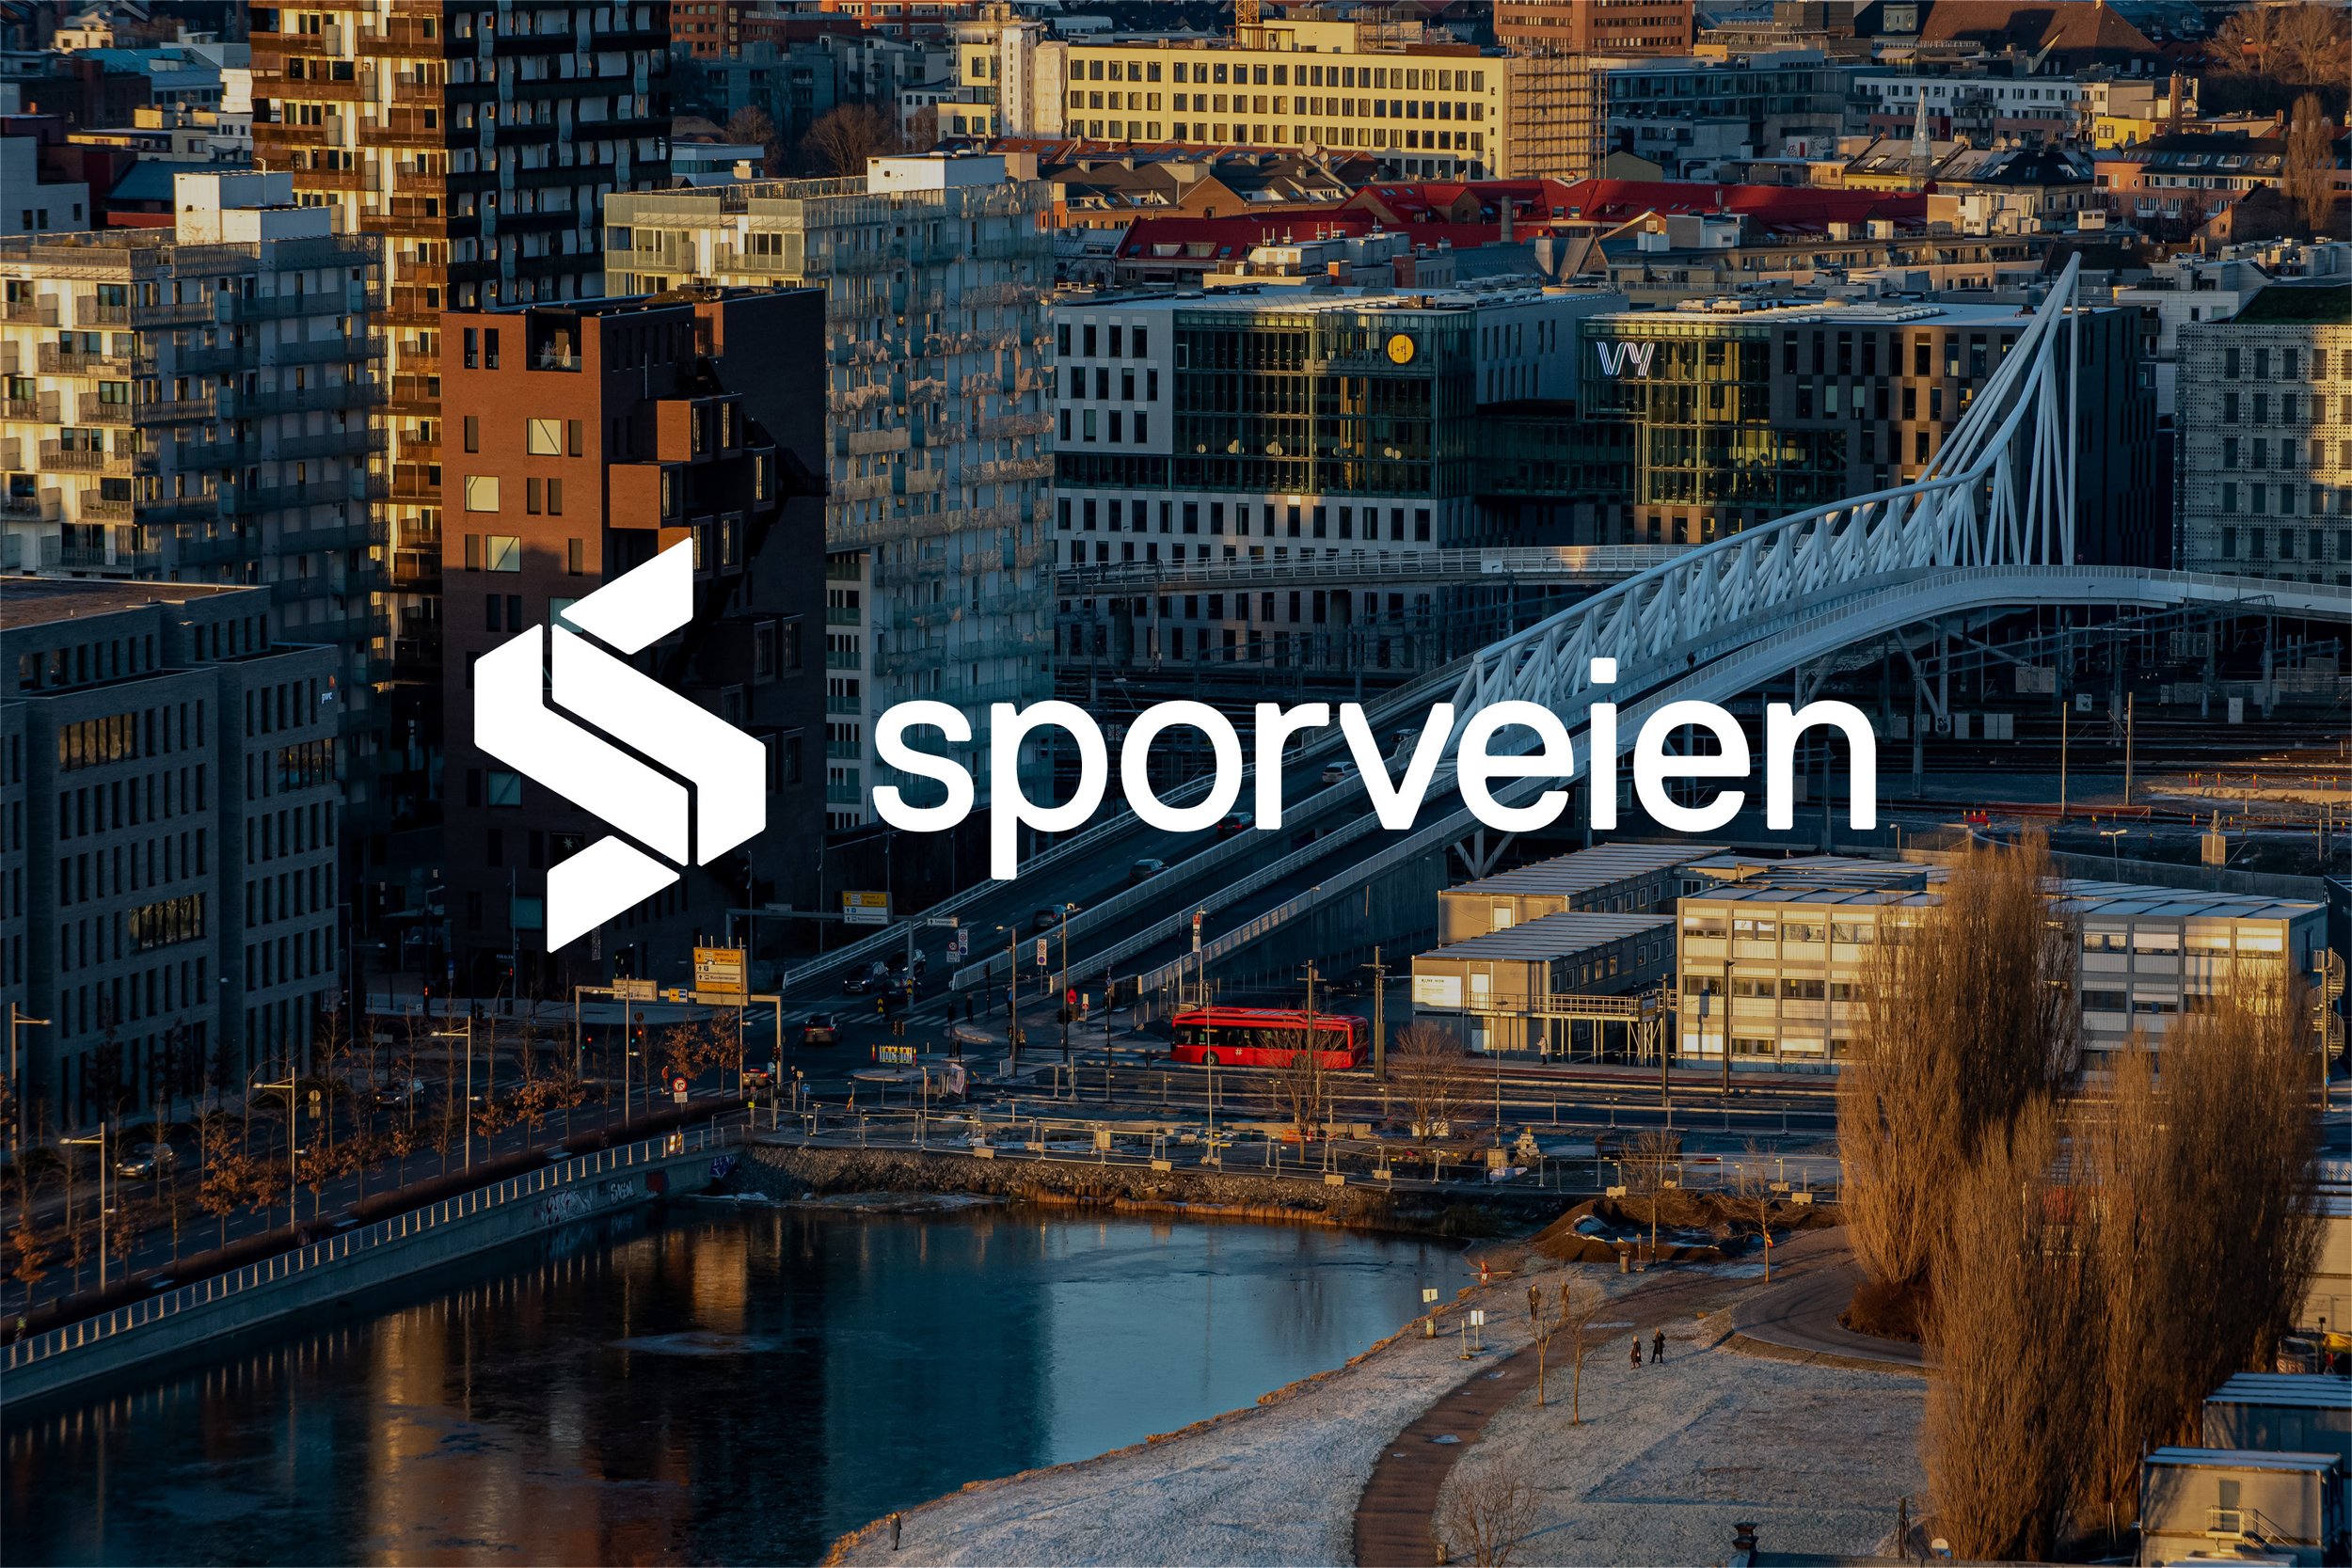 Sporveien logo over a picture of Oslo with a red bus in the foreground